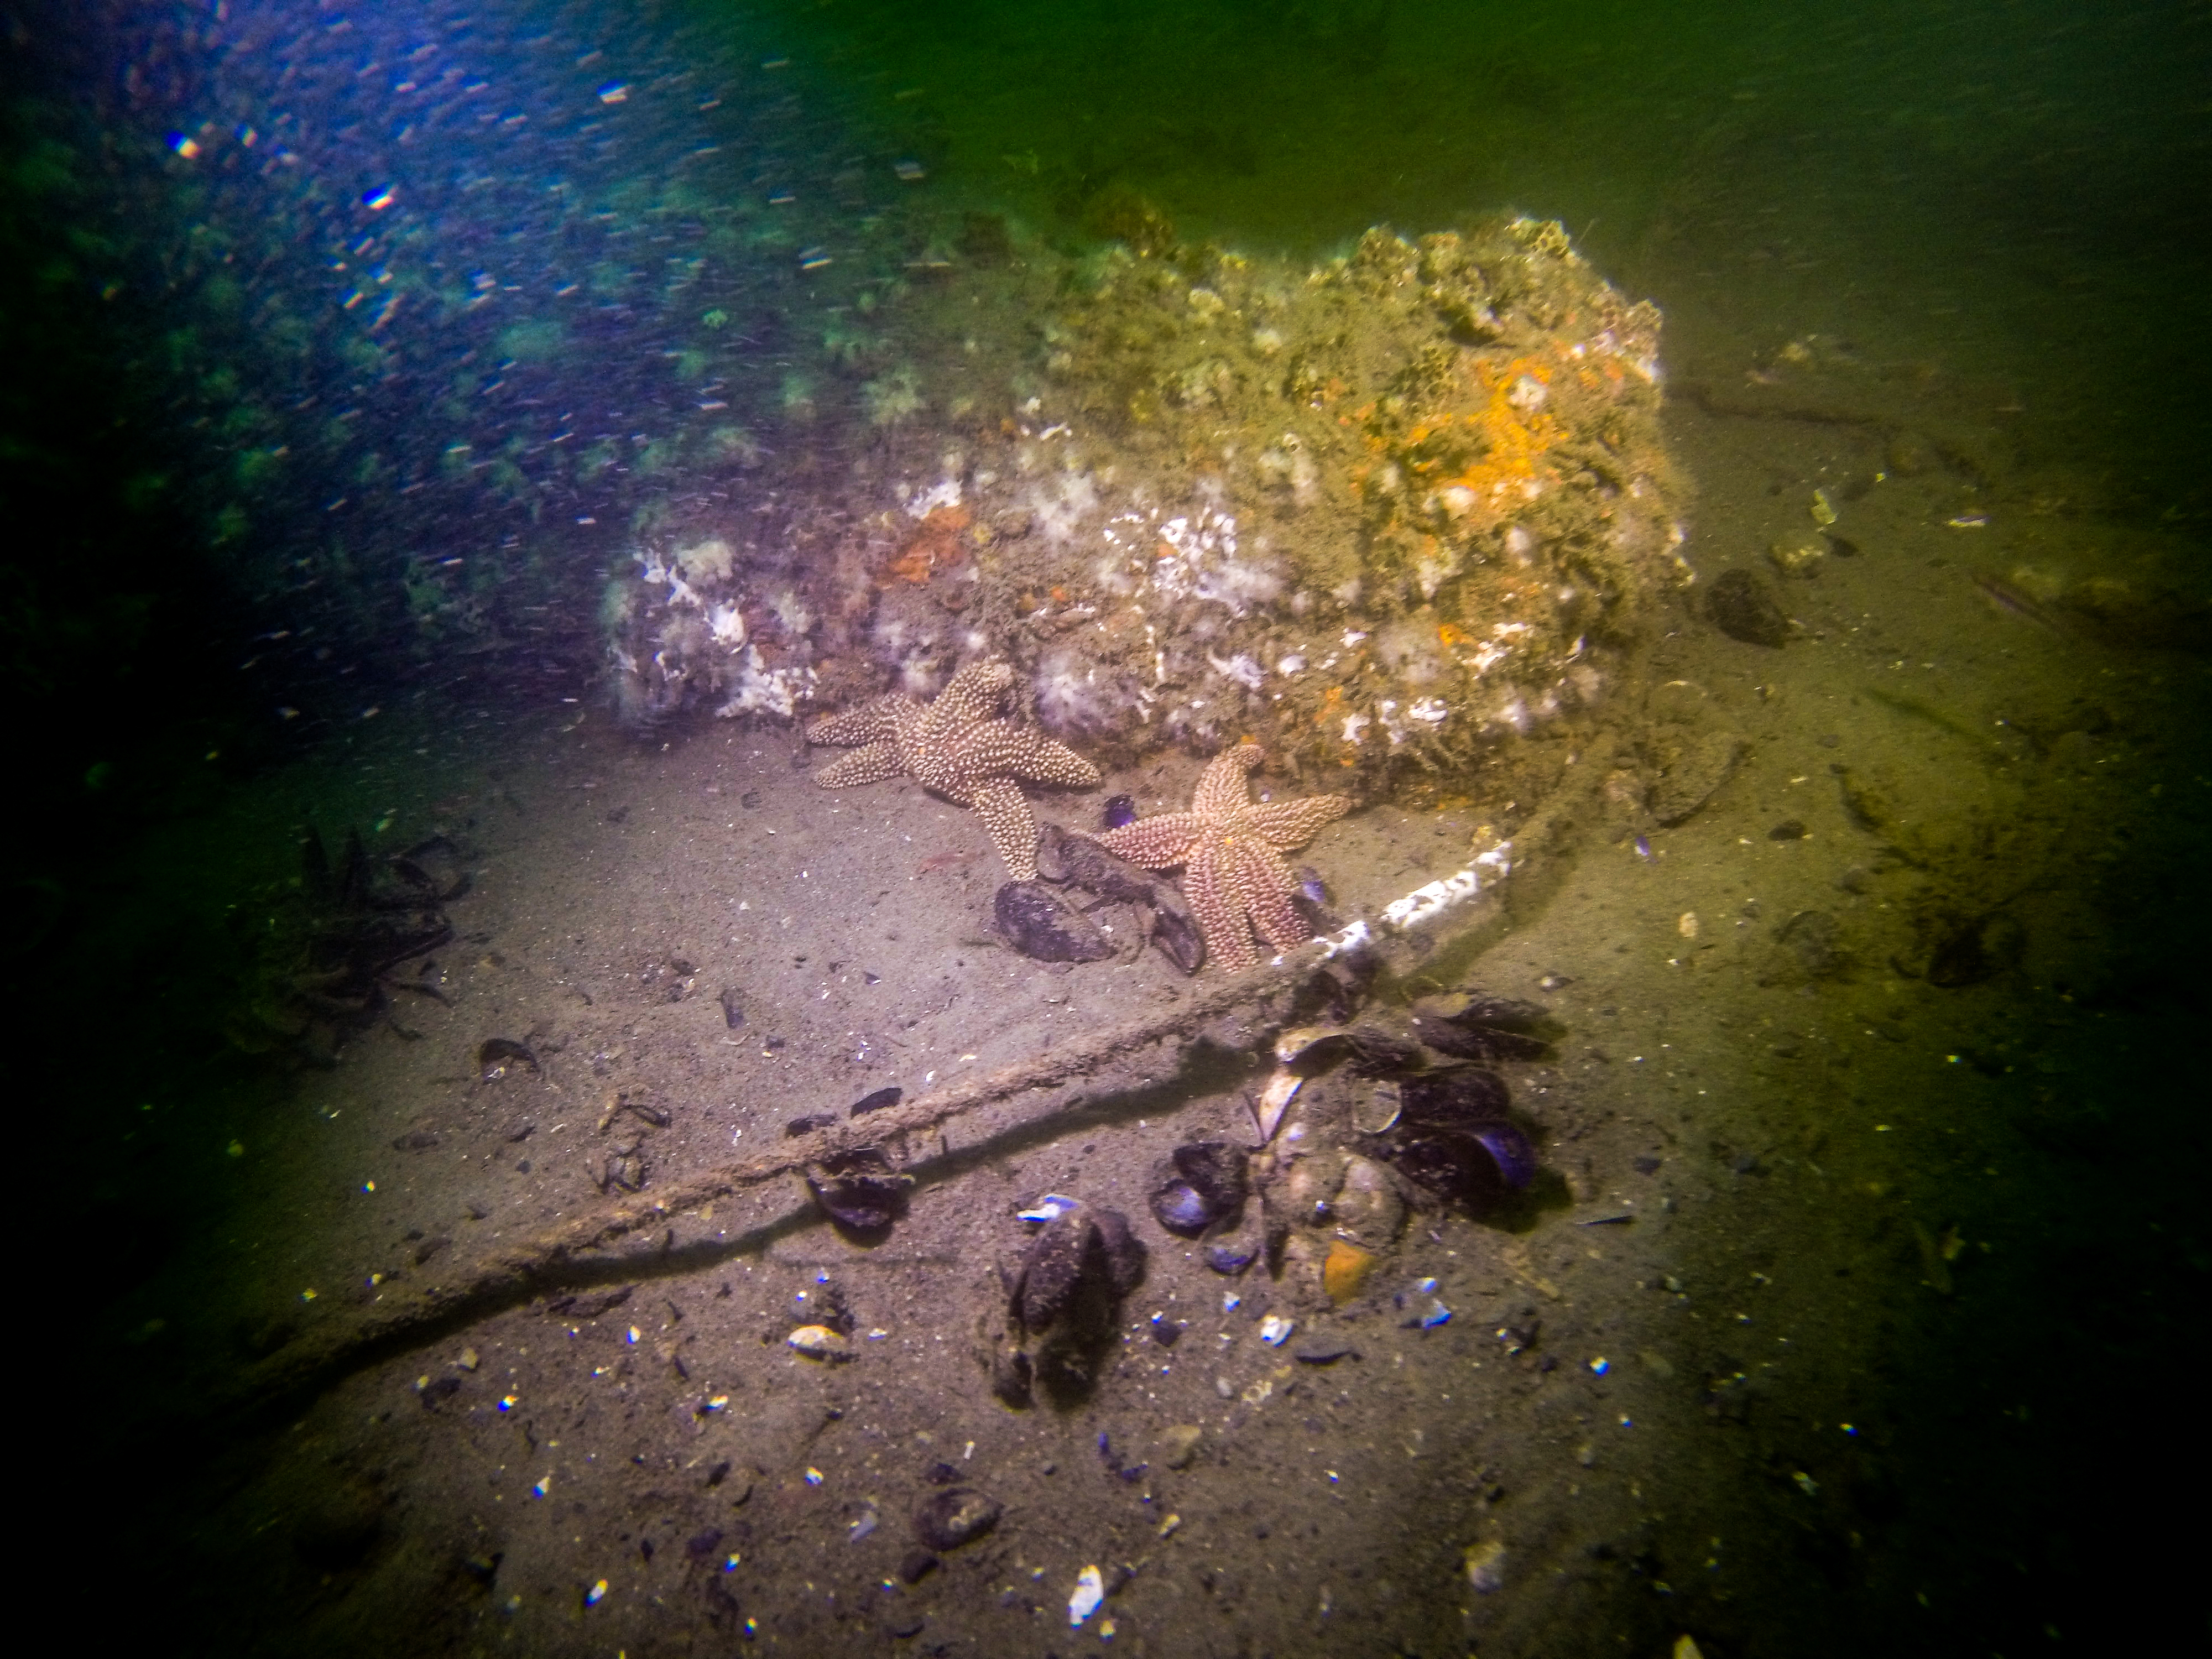 A photograph of the RI 2394 wreck covered in barnacles with starfish swimming nearby